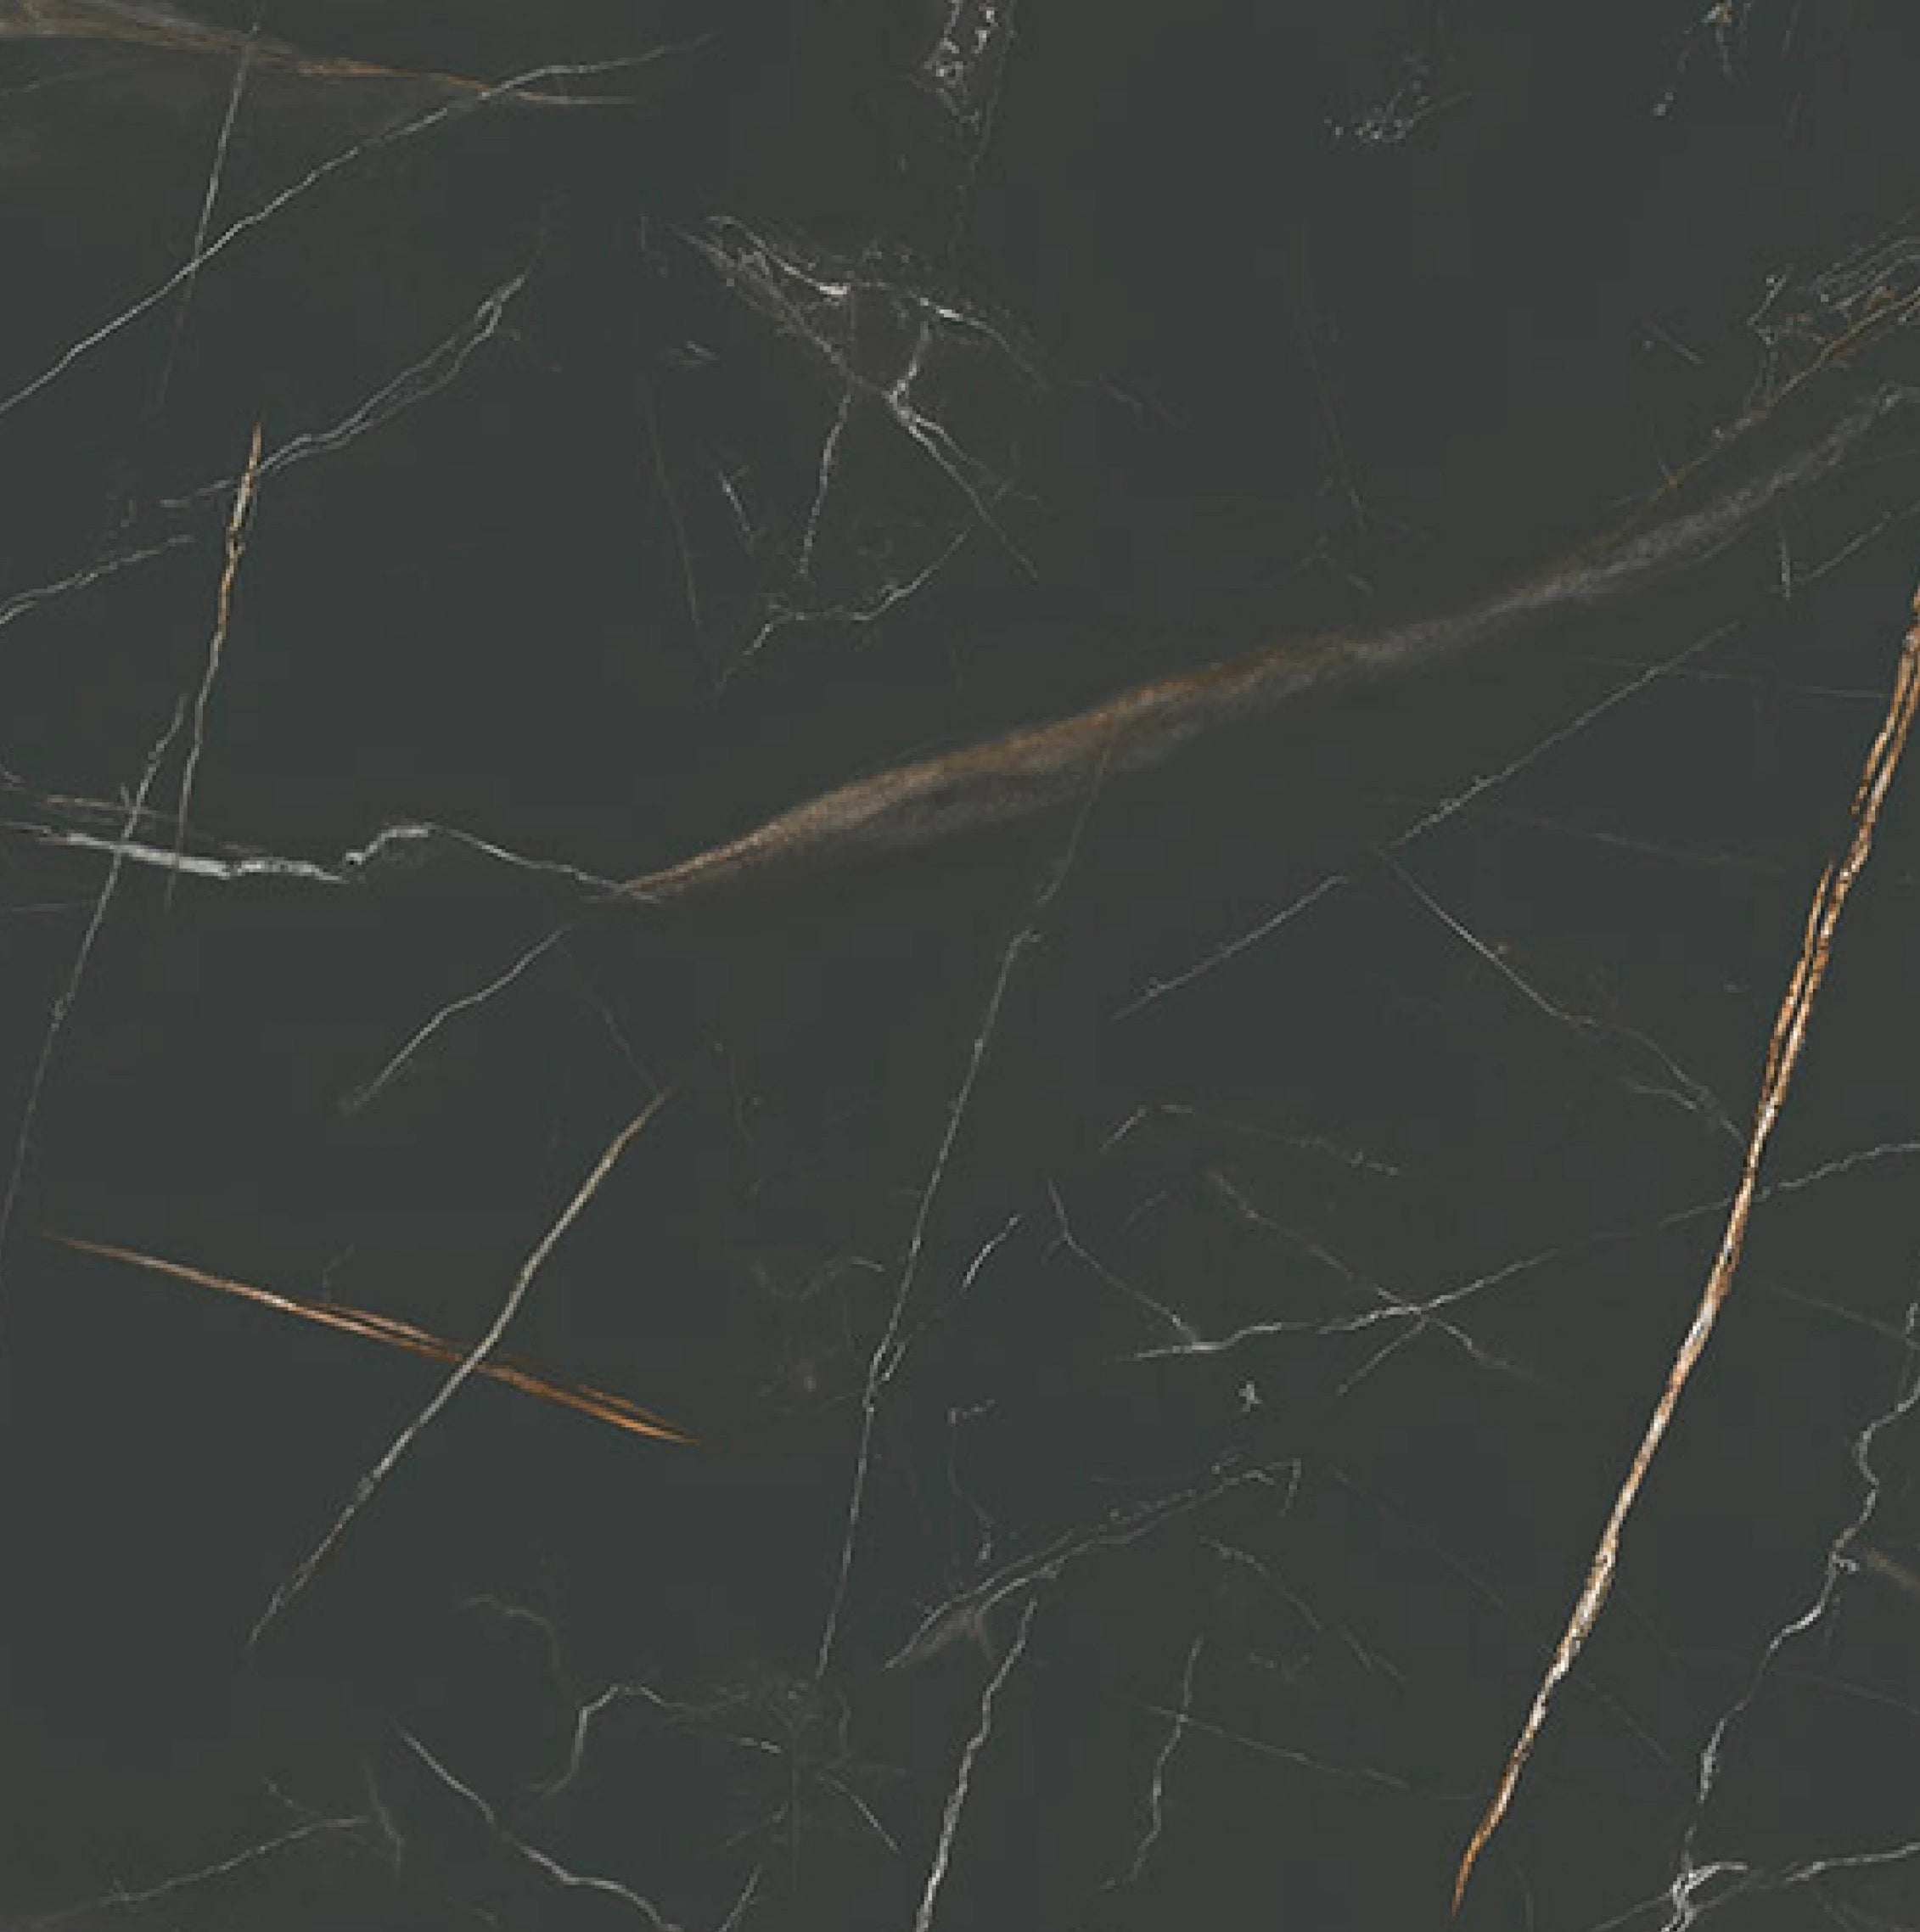 Contemporary Laminate Work Surfaces - Laurent Marble